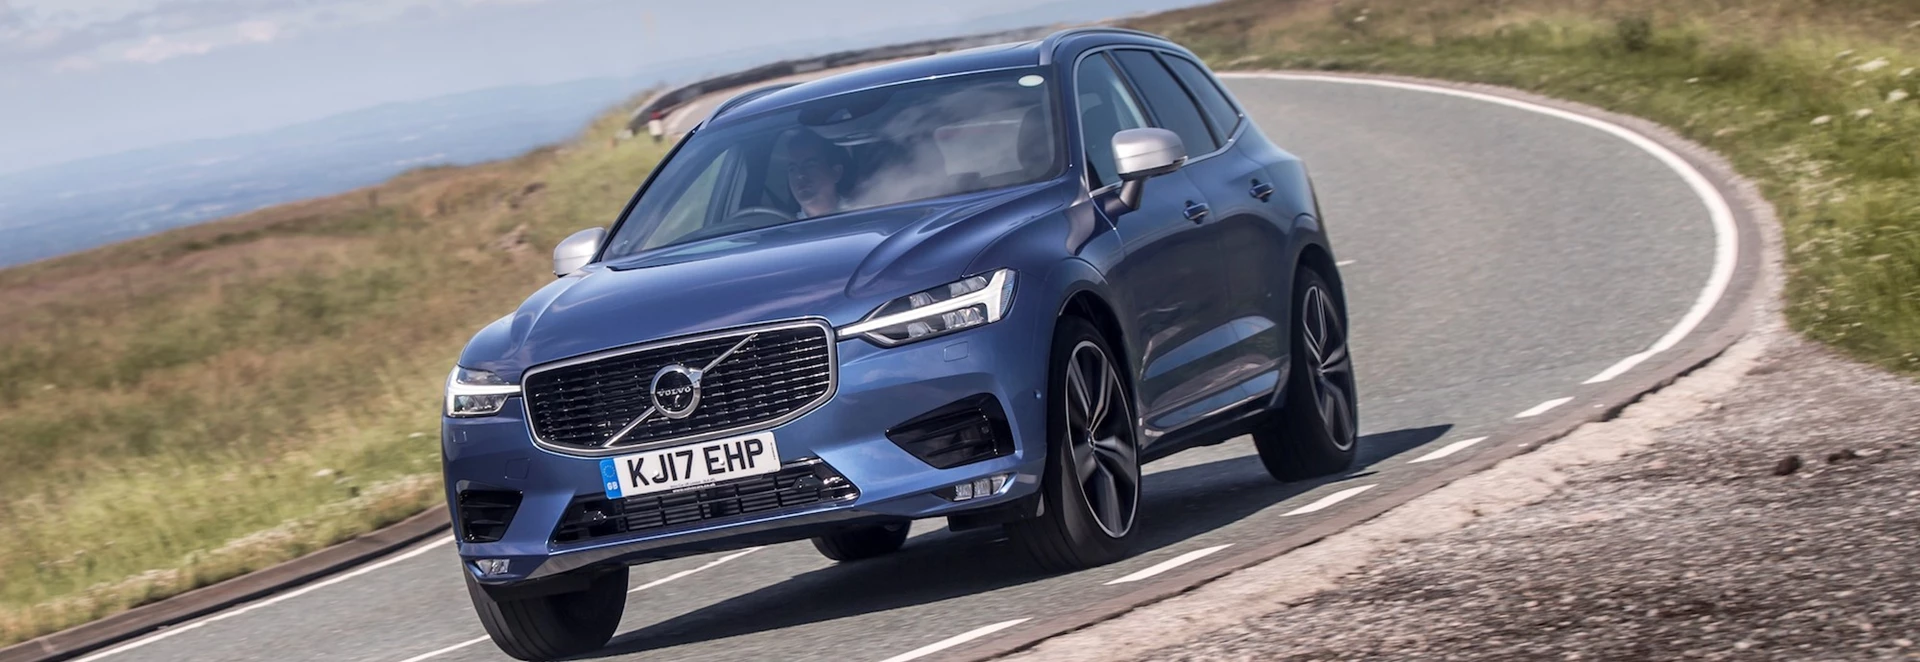 Volvo XC60 named best car launched in 2017